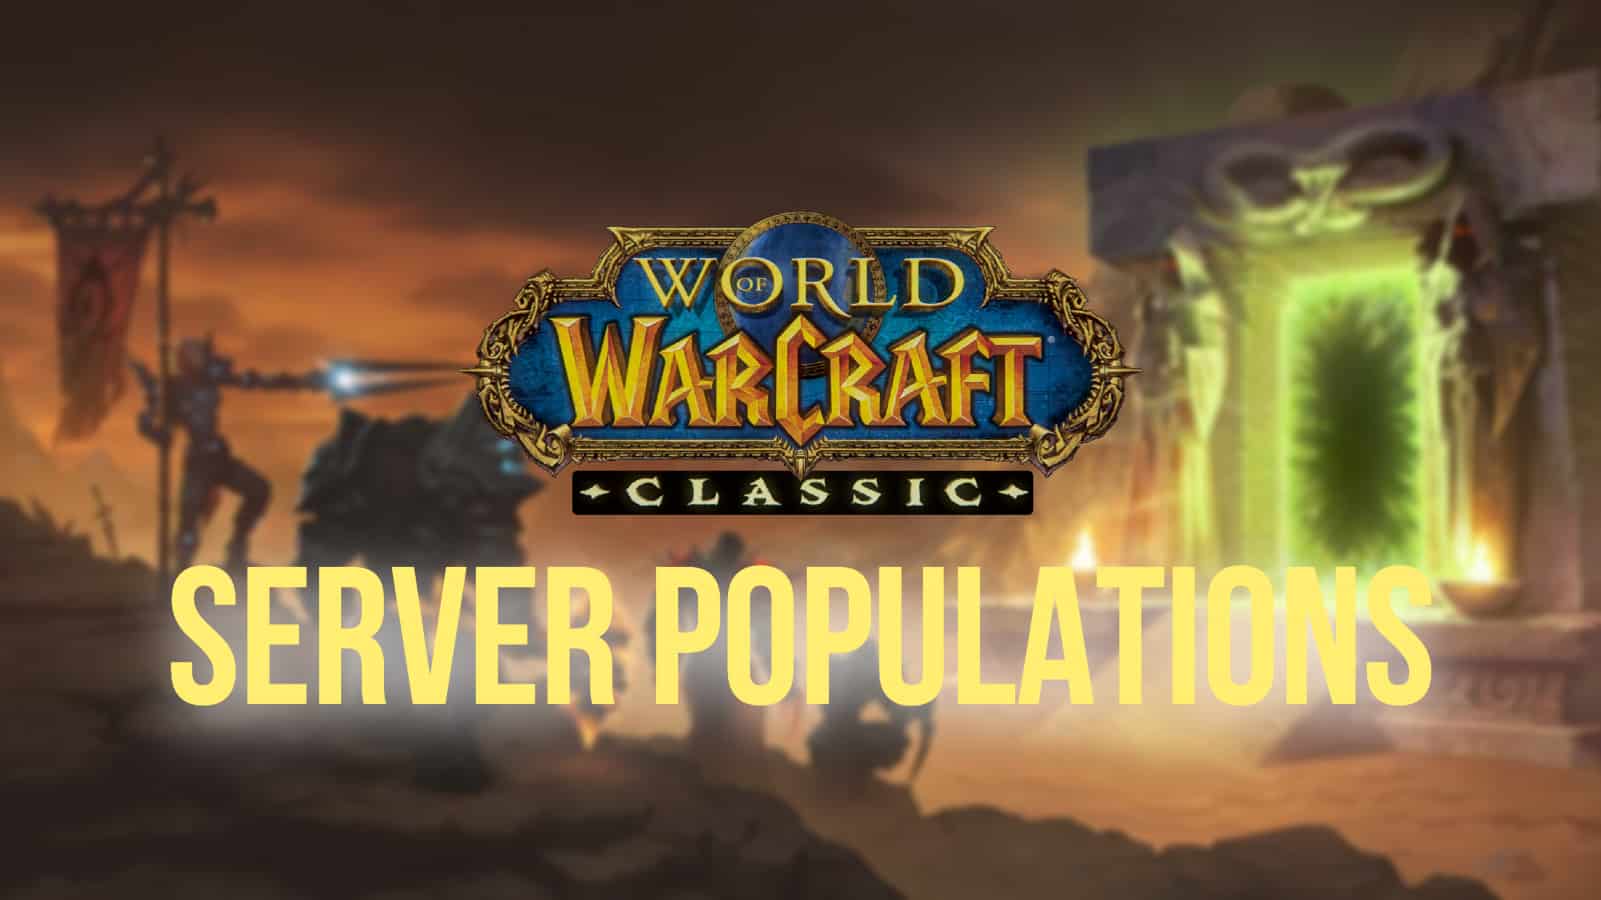 WoW Wrath of the Lich King Classic server populations in (June) - Dexerto